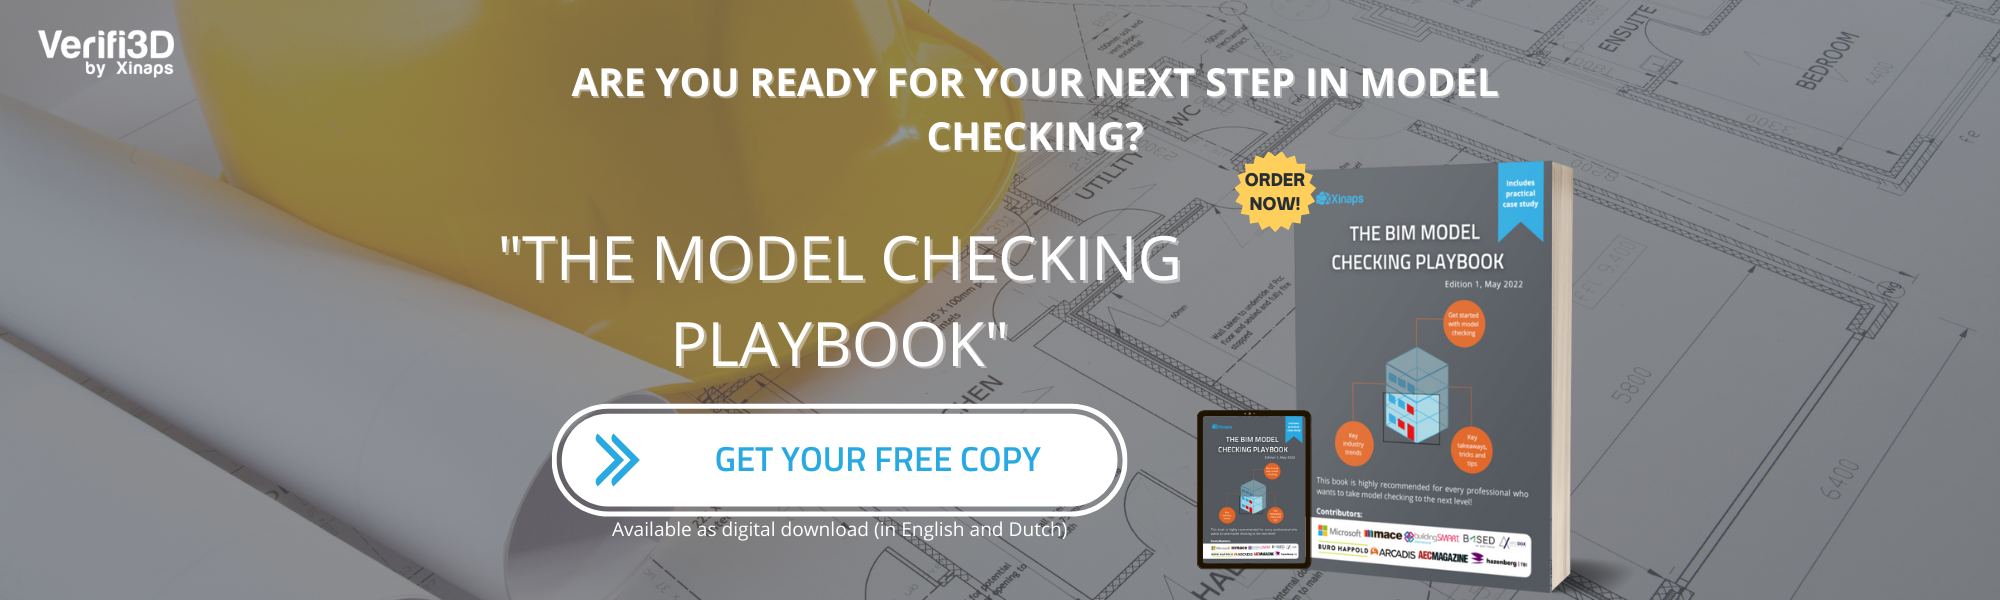 The BIM Model Checking Playbook – Order Now